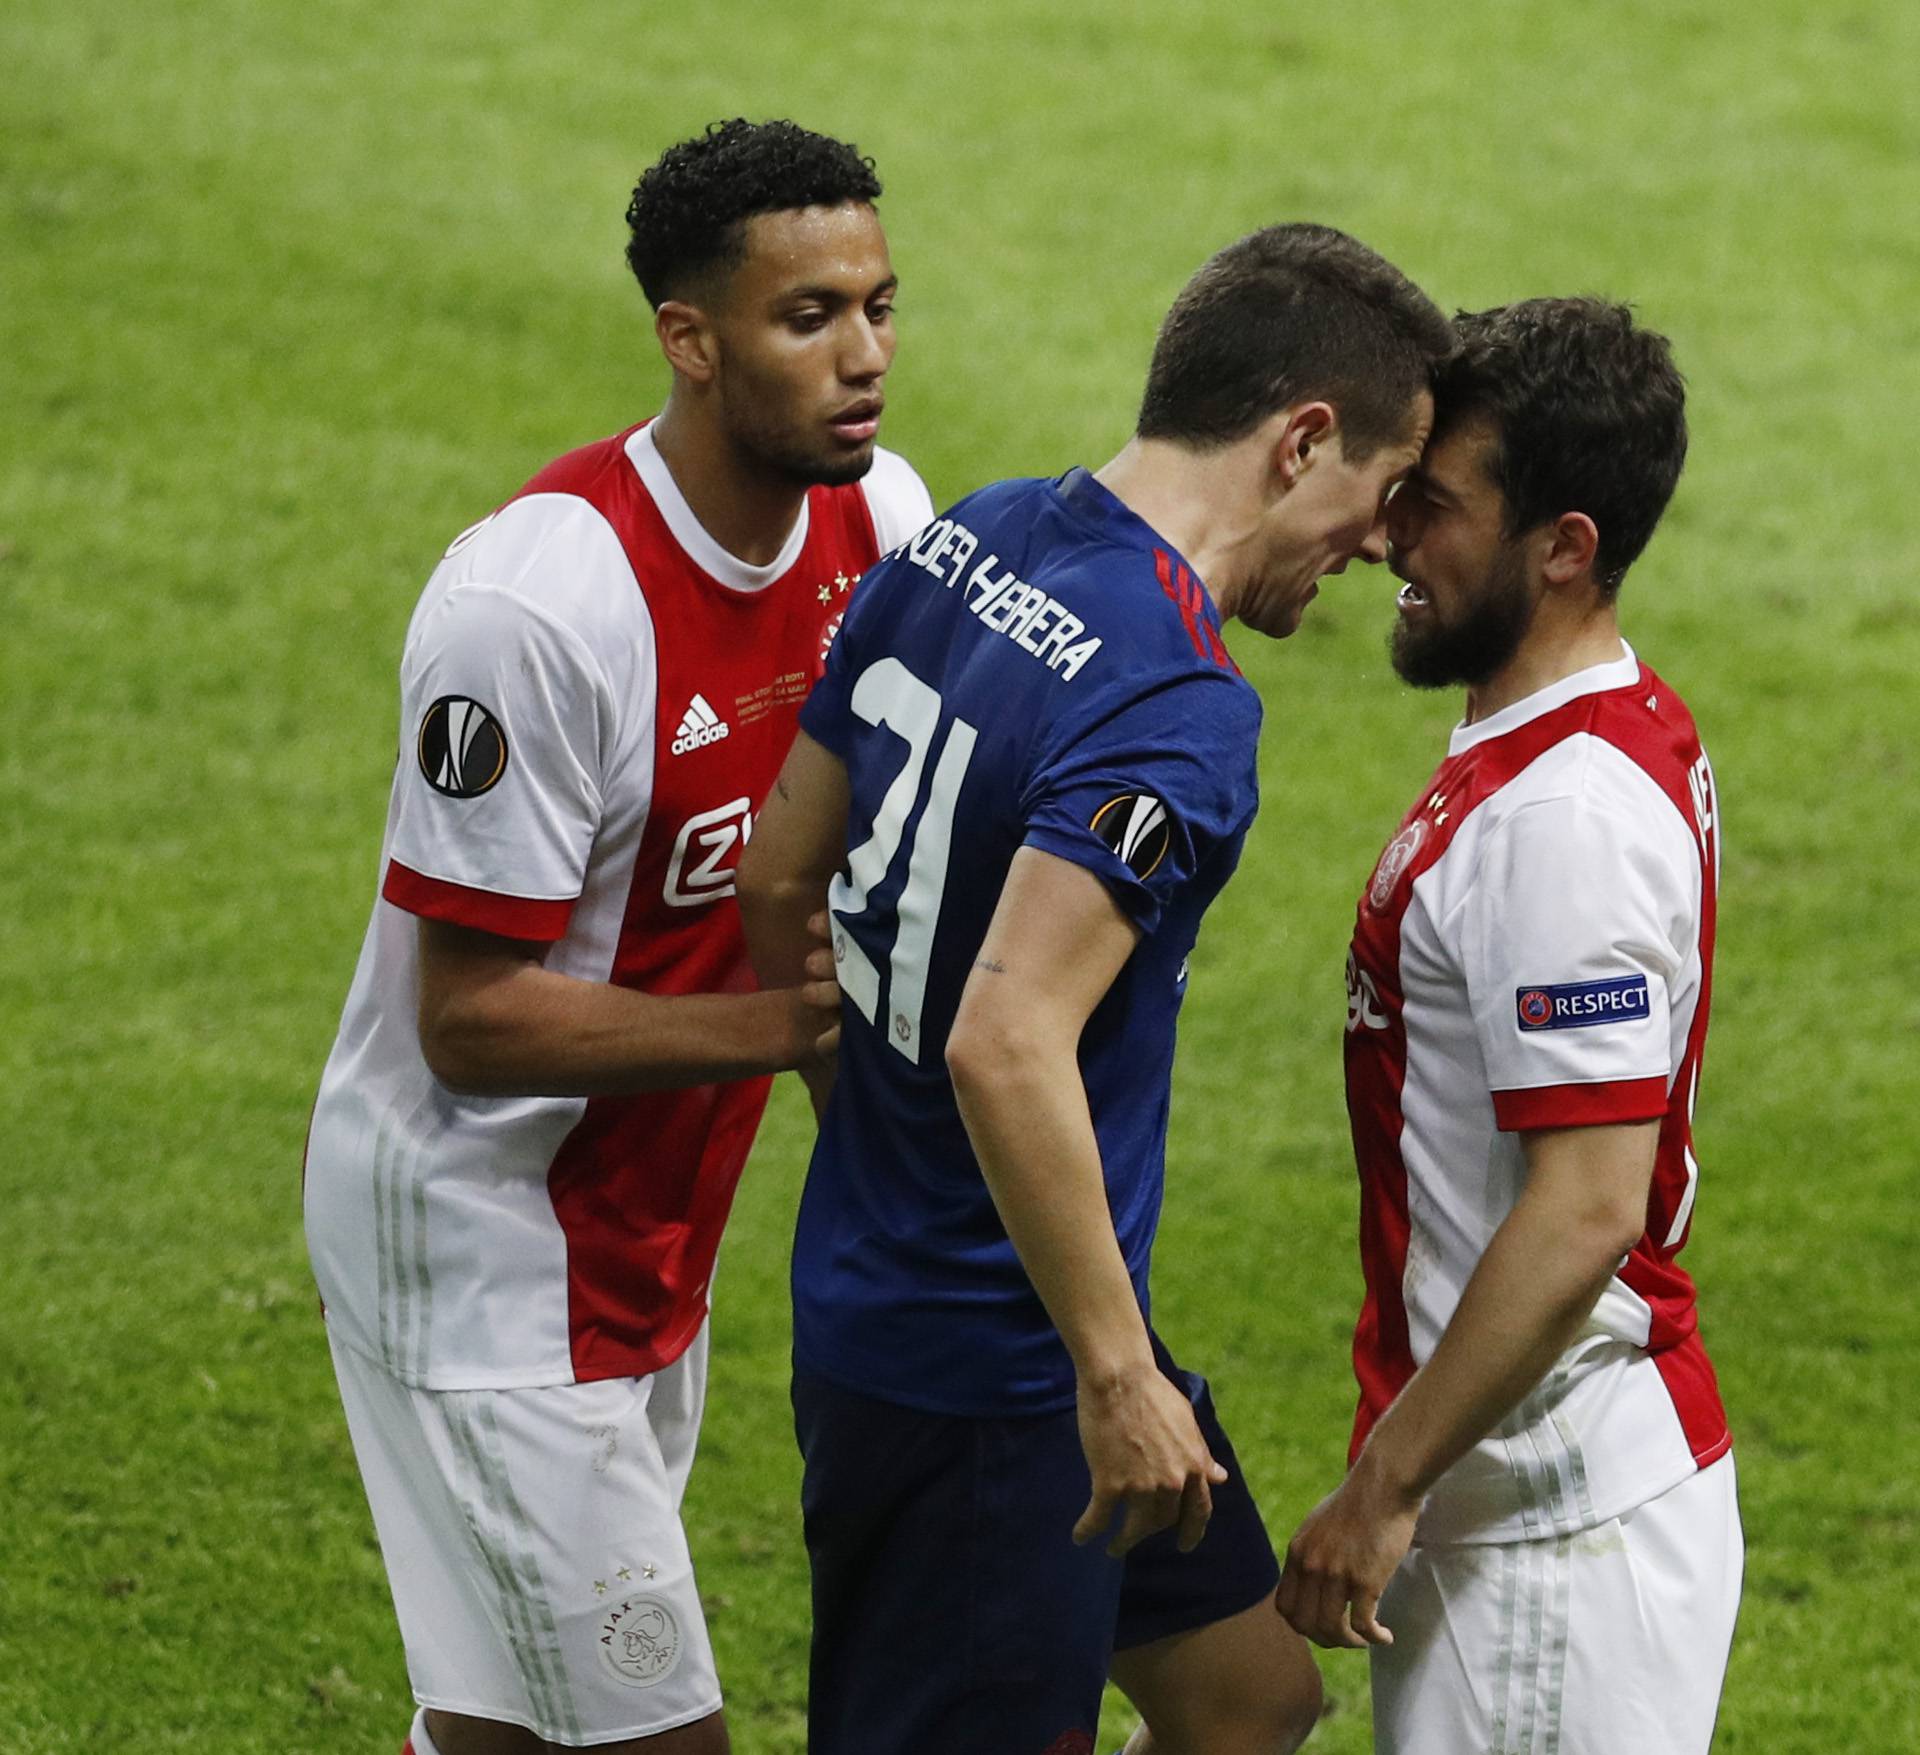 Manchester United's Ander Herrera squares up to Ajax's Amin Younes